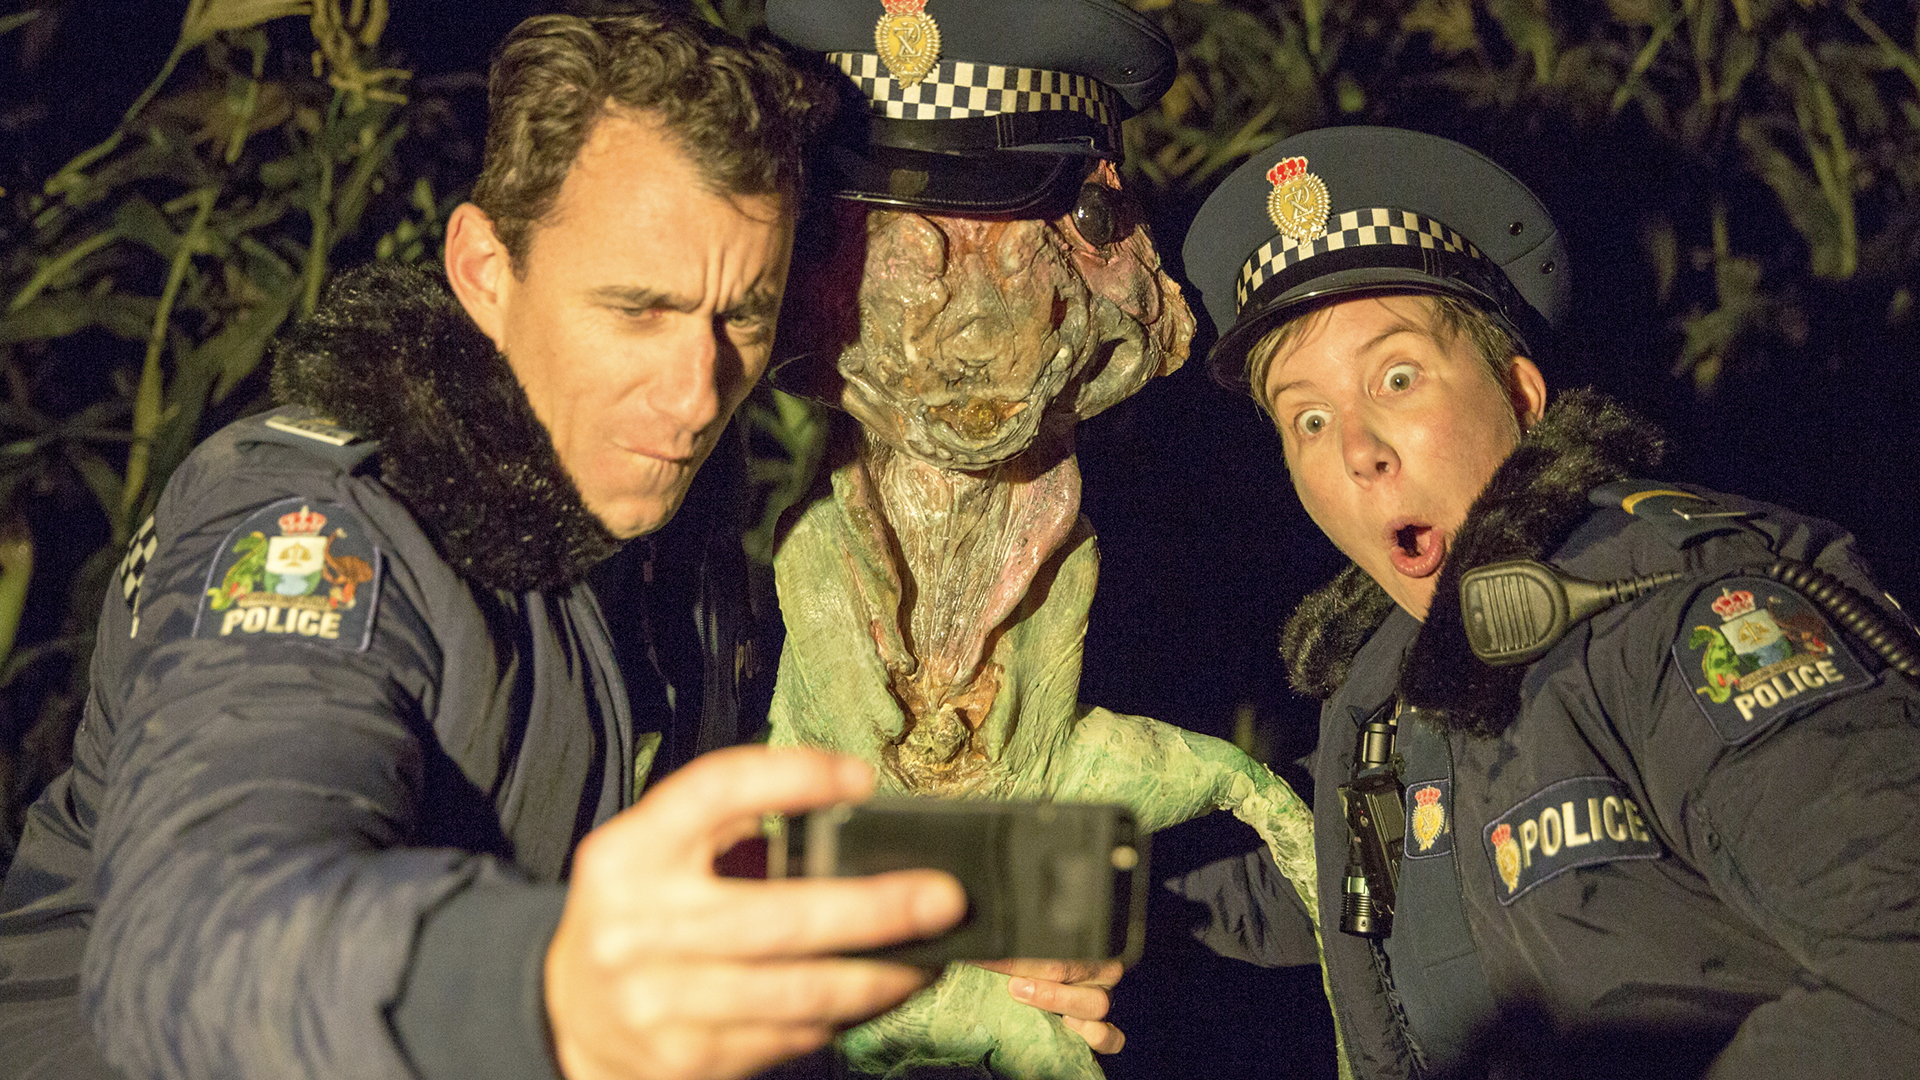 Mike Minogue as Officer Kyle Minogue and Karen O'Leary as Officer O'Leary pose with an alien-looking creature in the Wellington Paranormal.